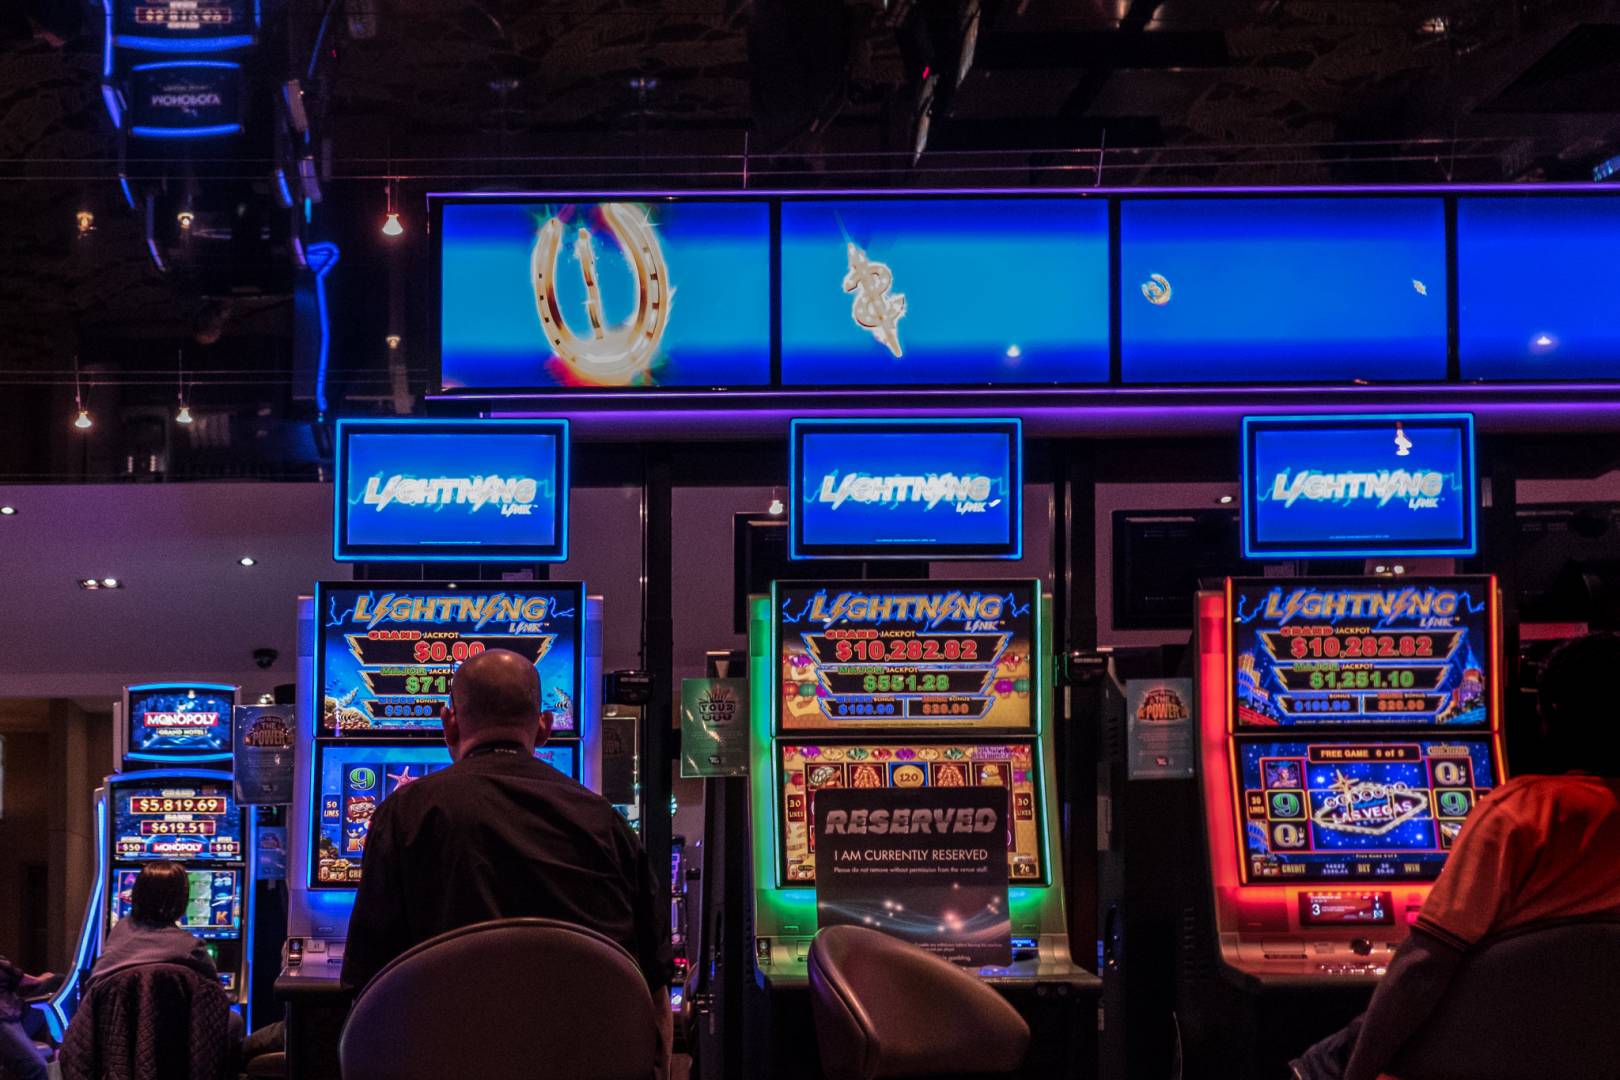 New Zealand continues to spot large gambling rises during COVID-19